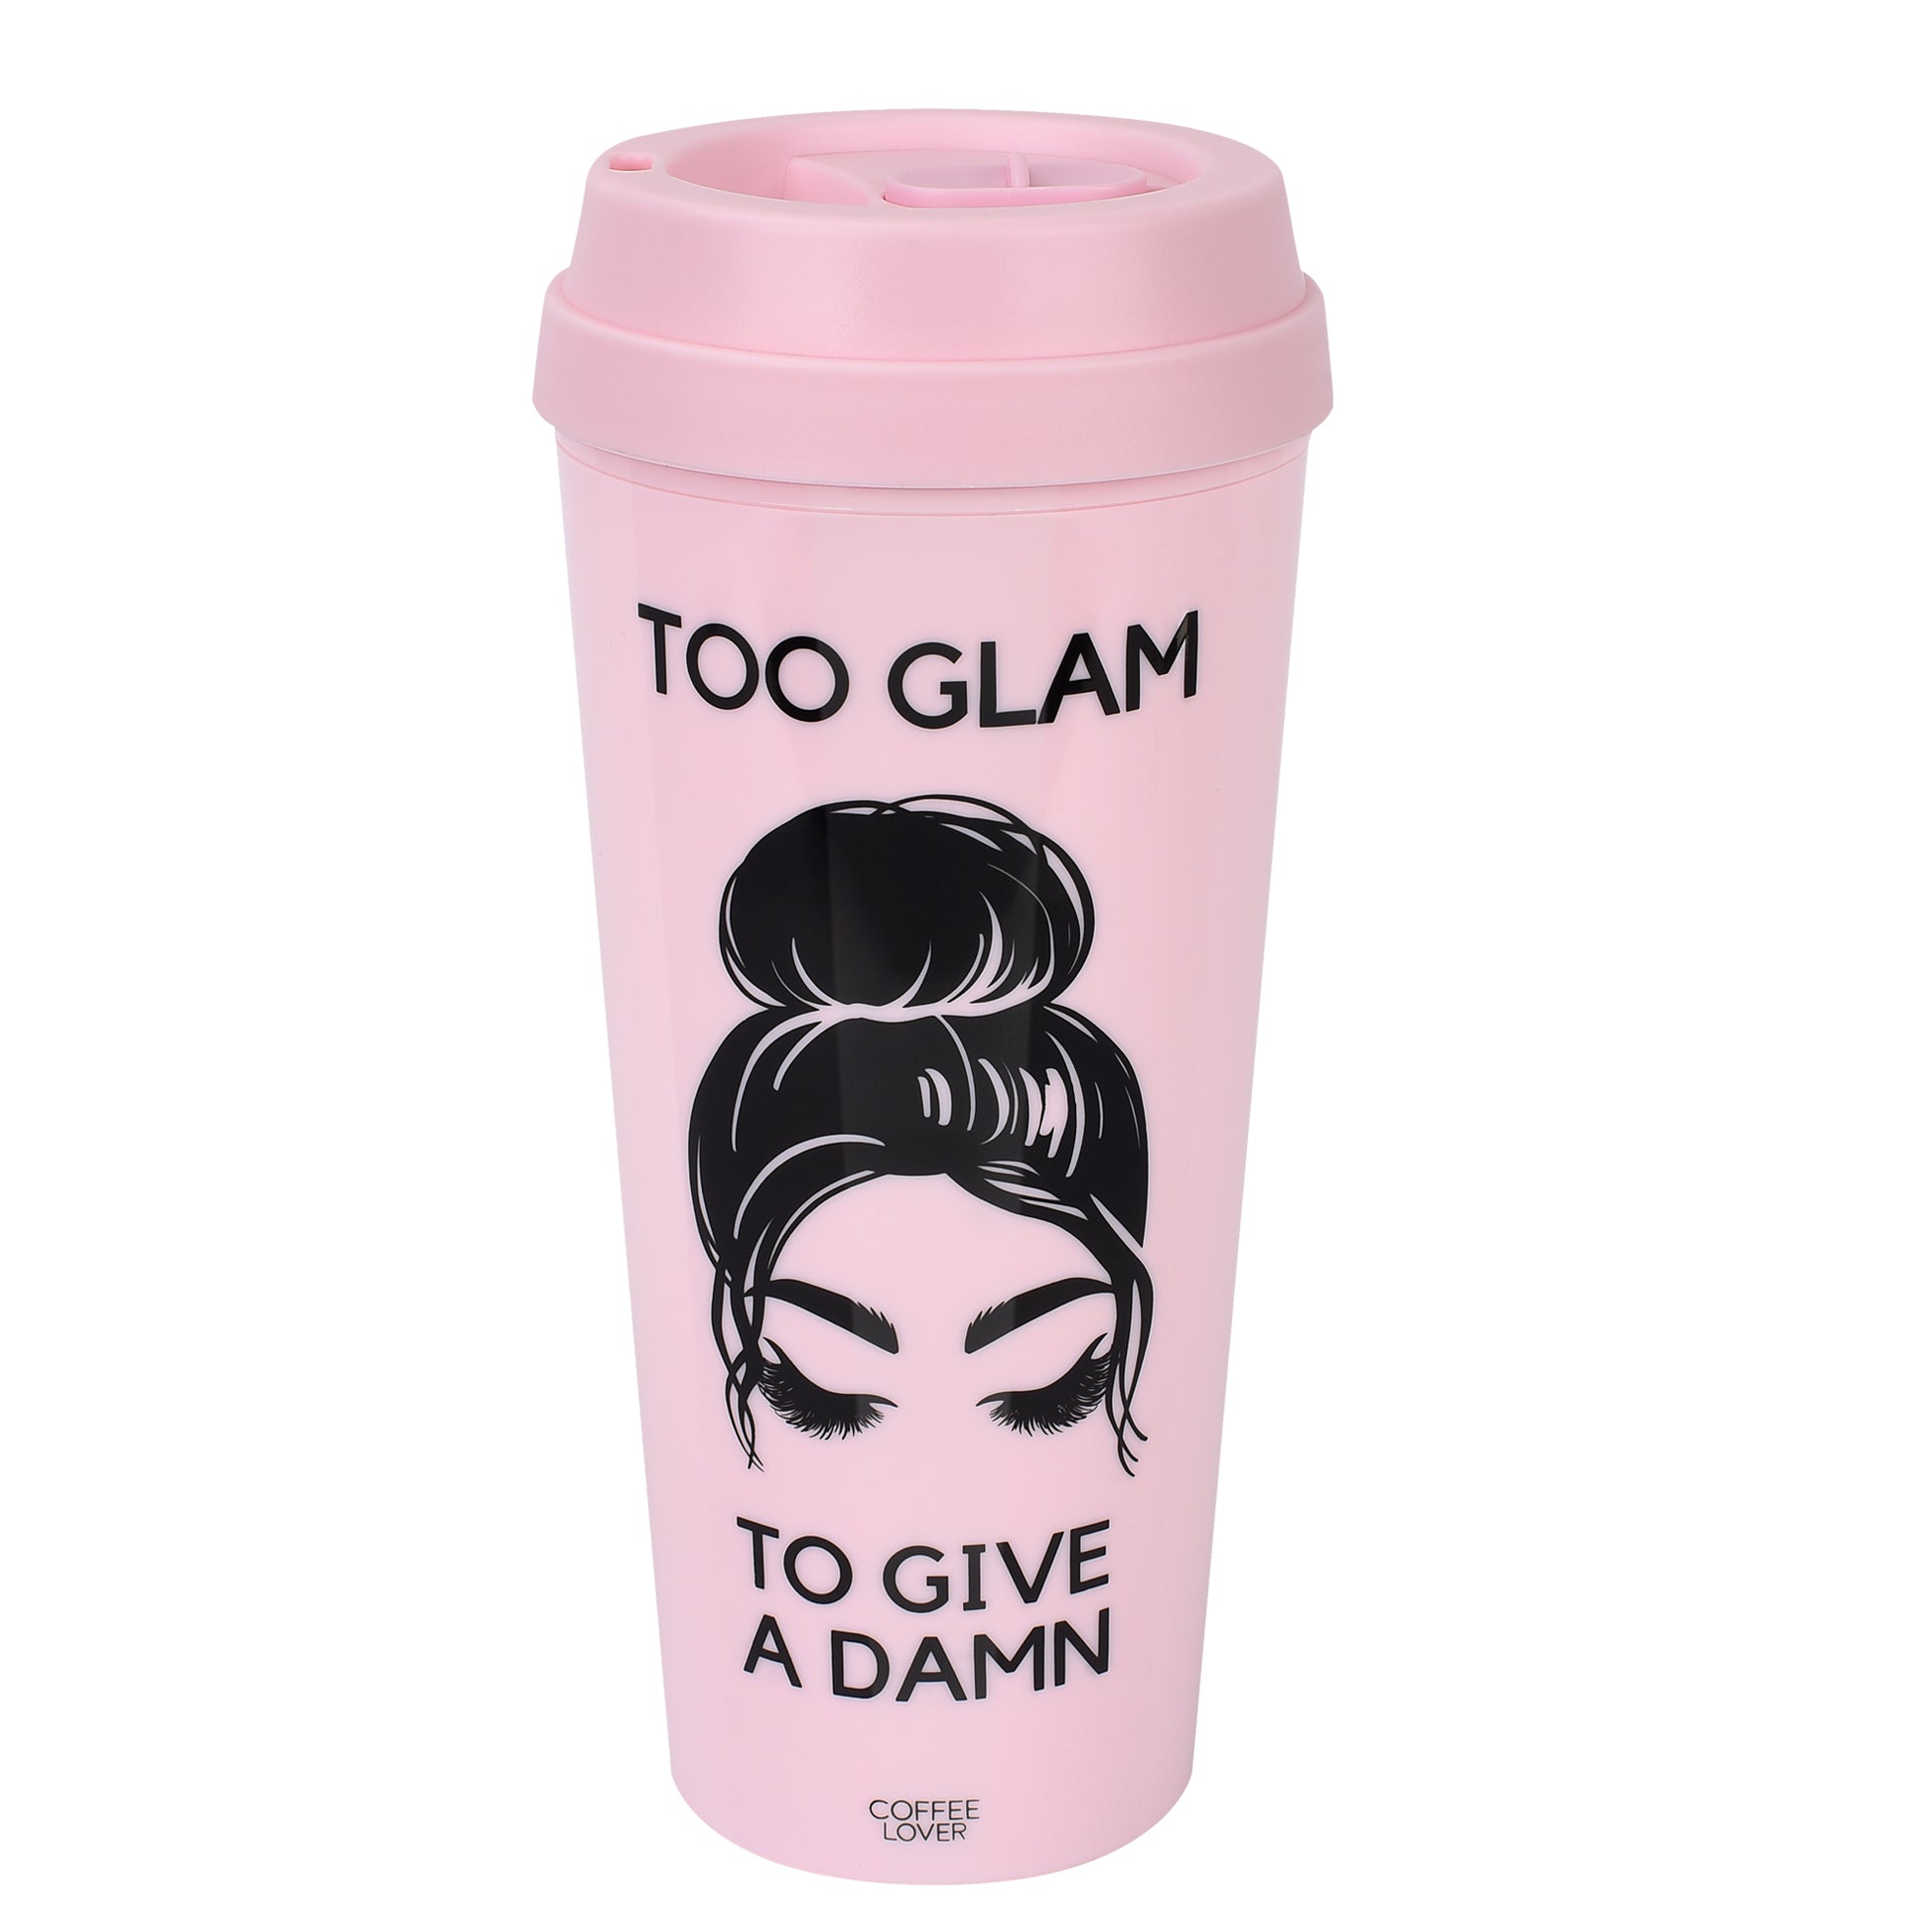 too-glam-to-give-a-damn-kaffeebecher-to-go-rosa-schwarz-thermobecher-isolierfunktion-cooler-spruch-frauen-beauty-wimpern 450ml doppelwandig